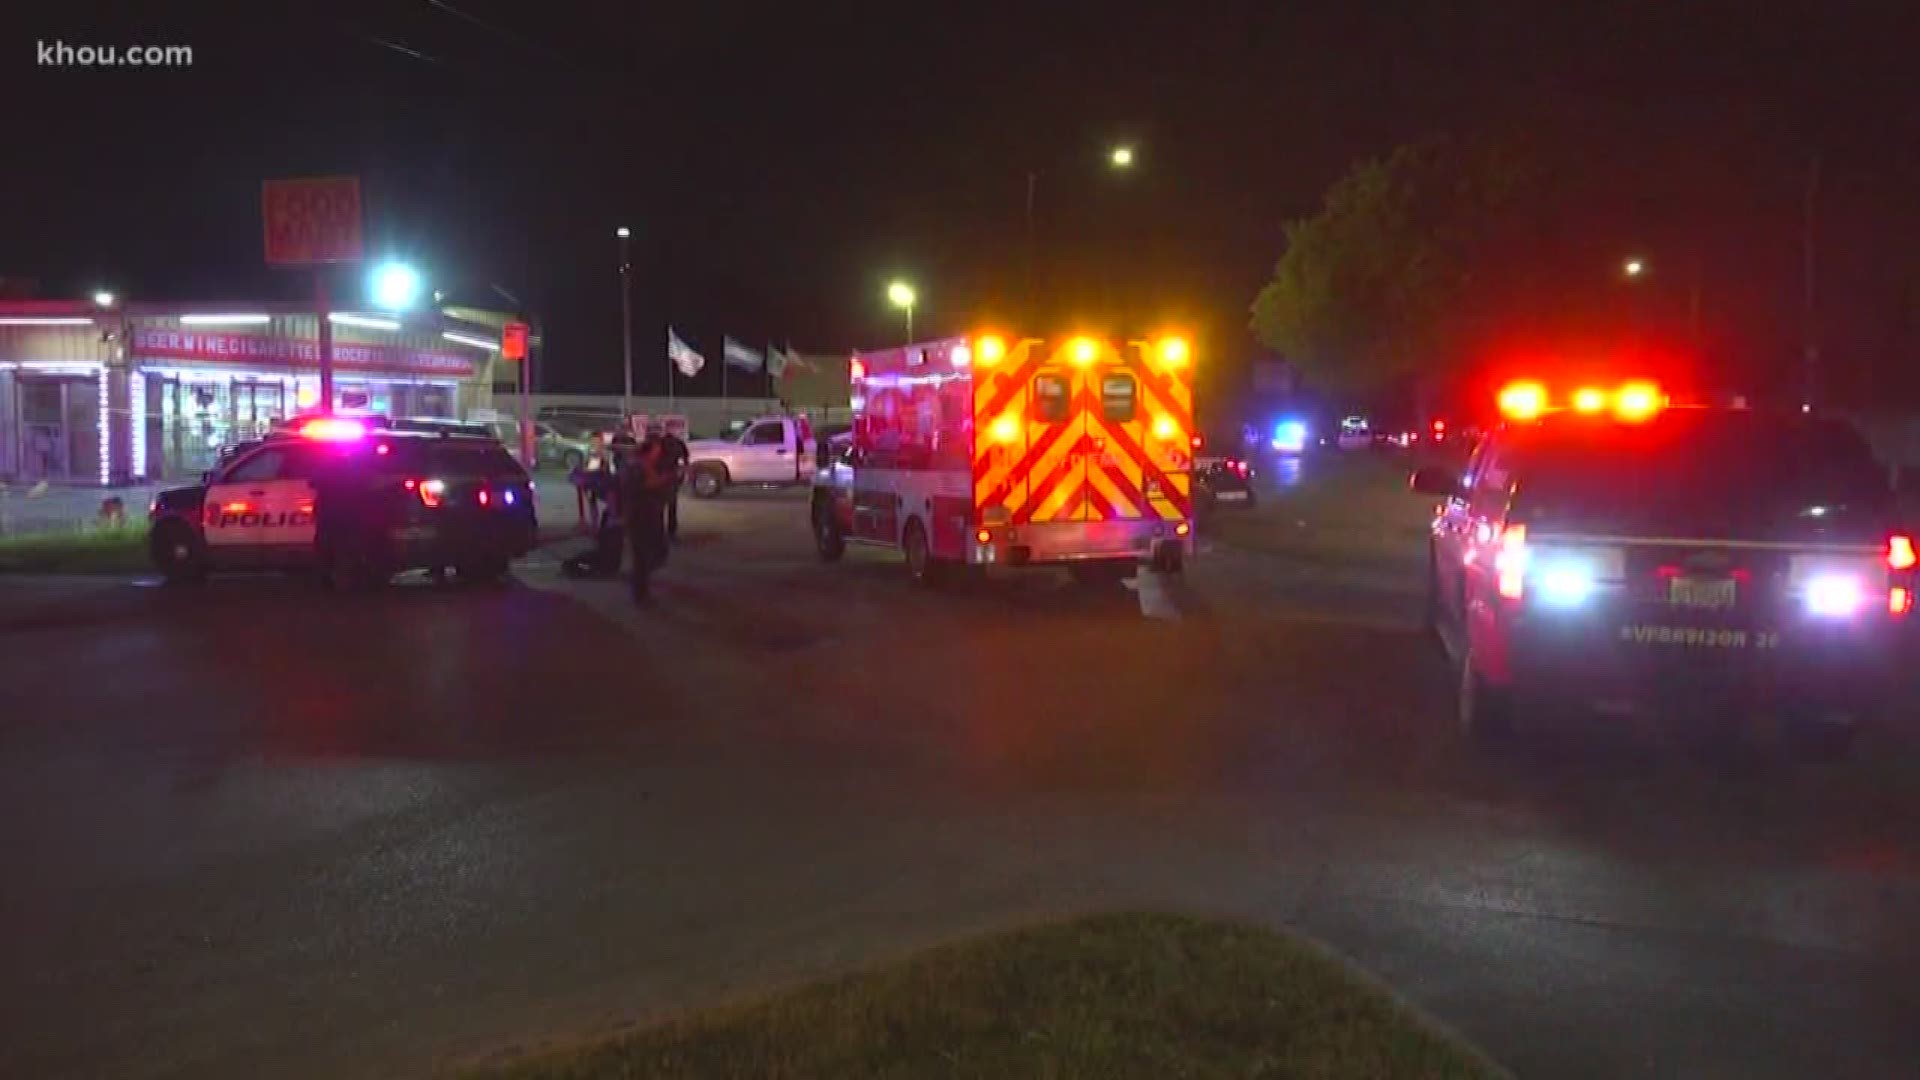 A man was shot several times Saturday night after police said he tried to rob a tow truck driver in southeast Houston. The tow truck driver managed to get the gun away from the robbery suspect and shoot him in the arm and leg.